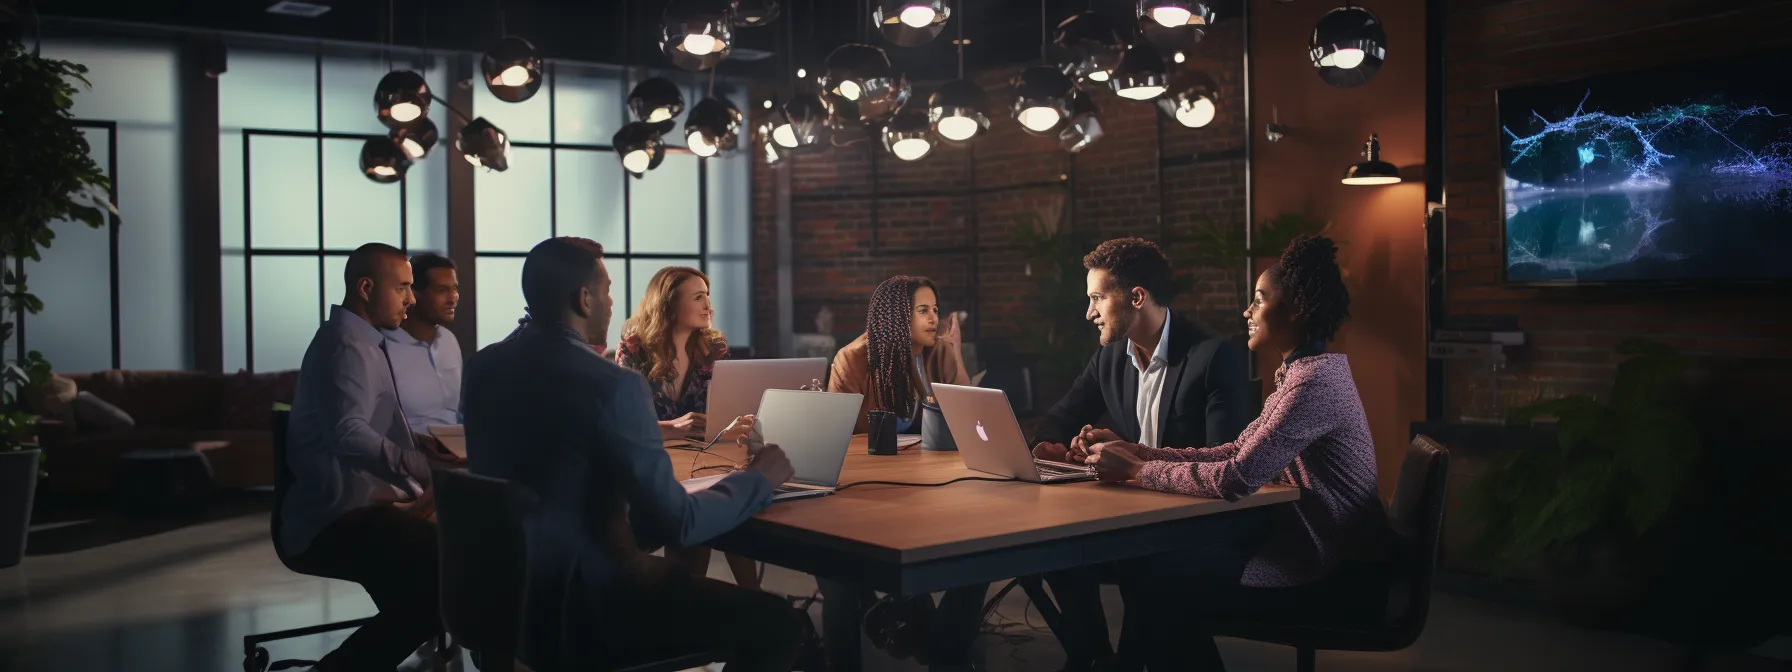 a group of content creators discussing seo strategies and trends in a futuristic conference room.